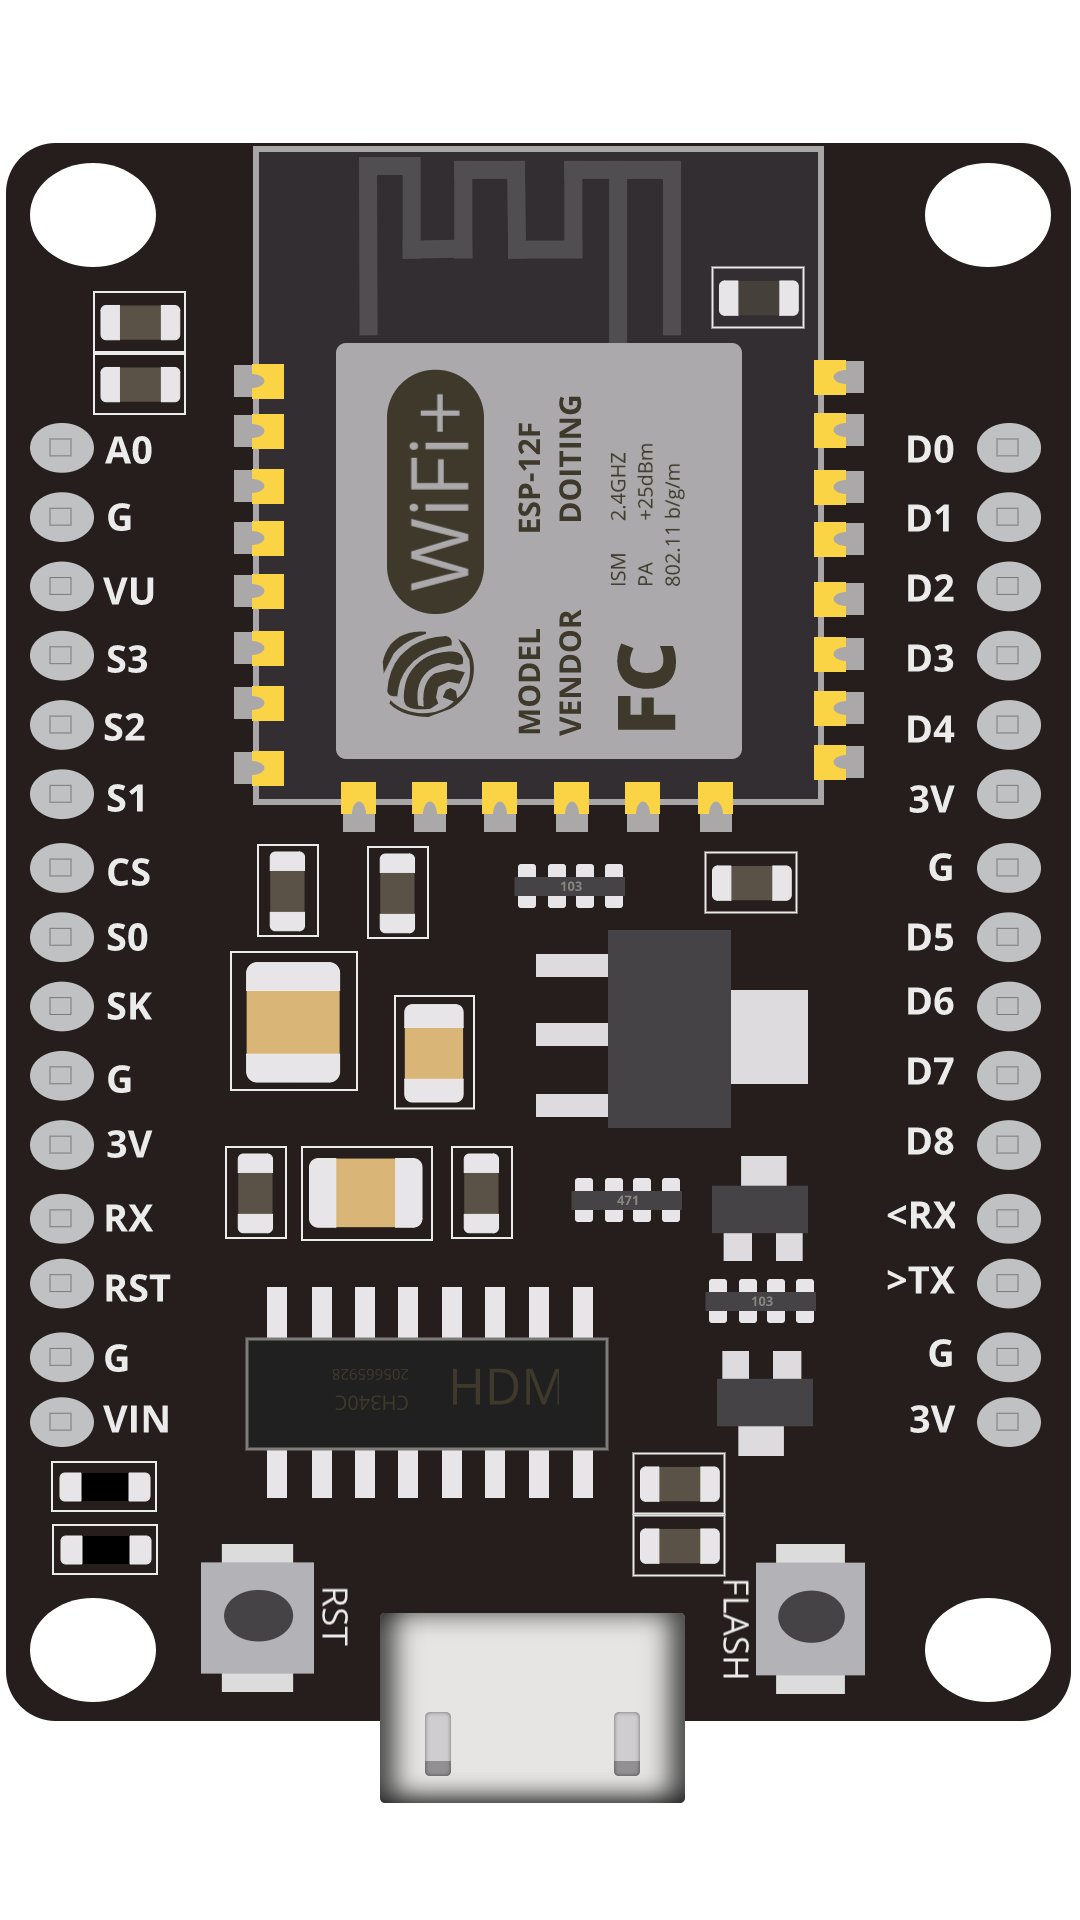 Getting Started With The Esp8266 01 Led Blink Using Arduino Ide Video ...